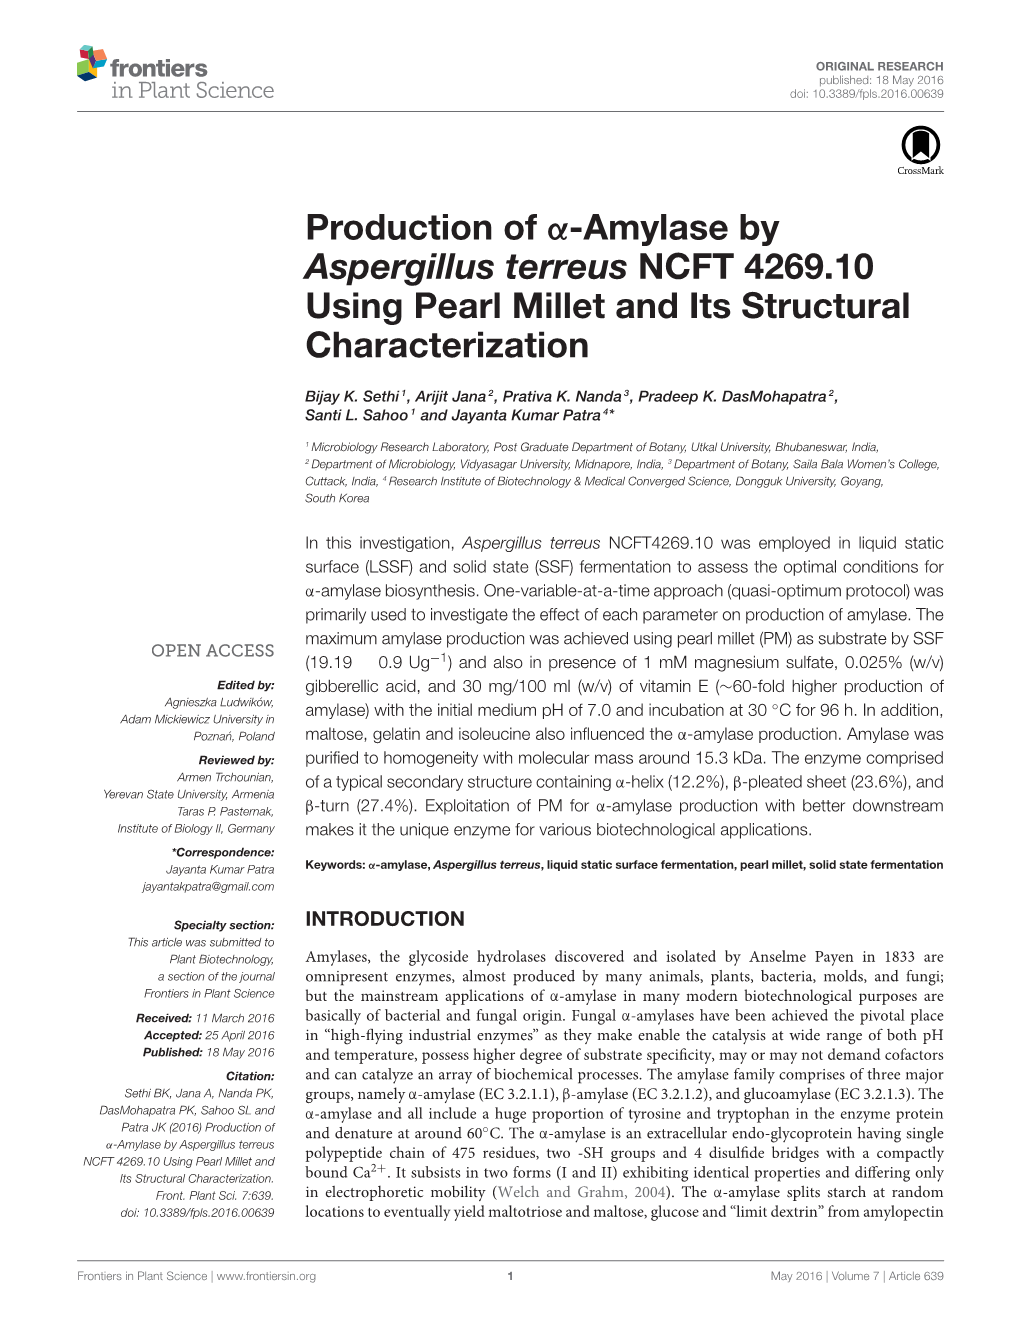 Production of Α-Amylase by Aspergillus Terreus NCFT 4269.10 Using Pearl Millet and Its Structural Characterization